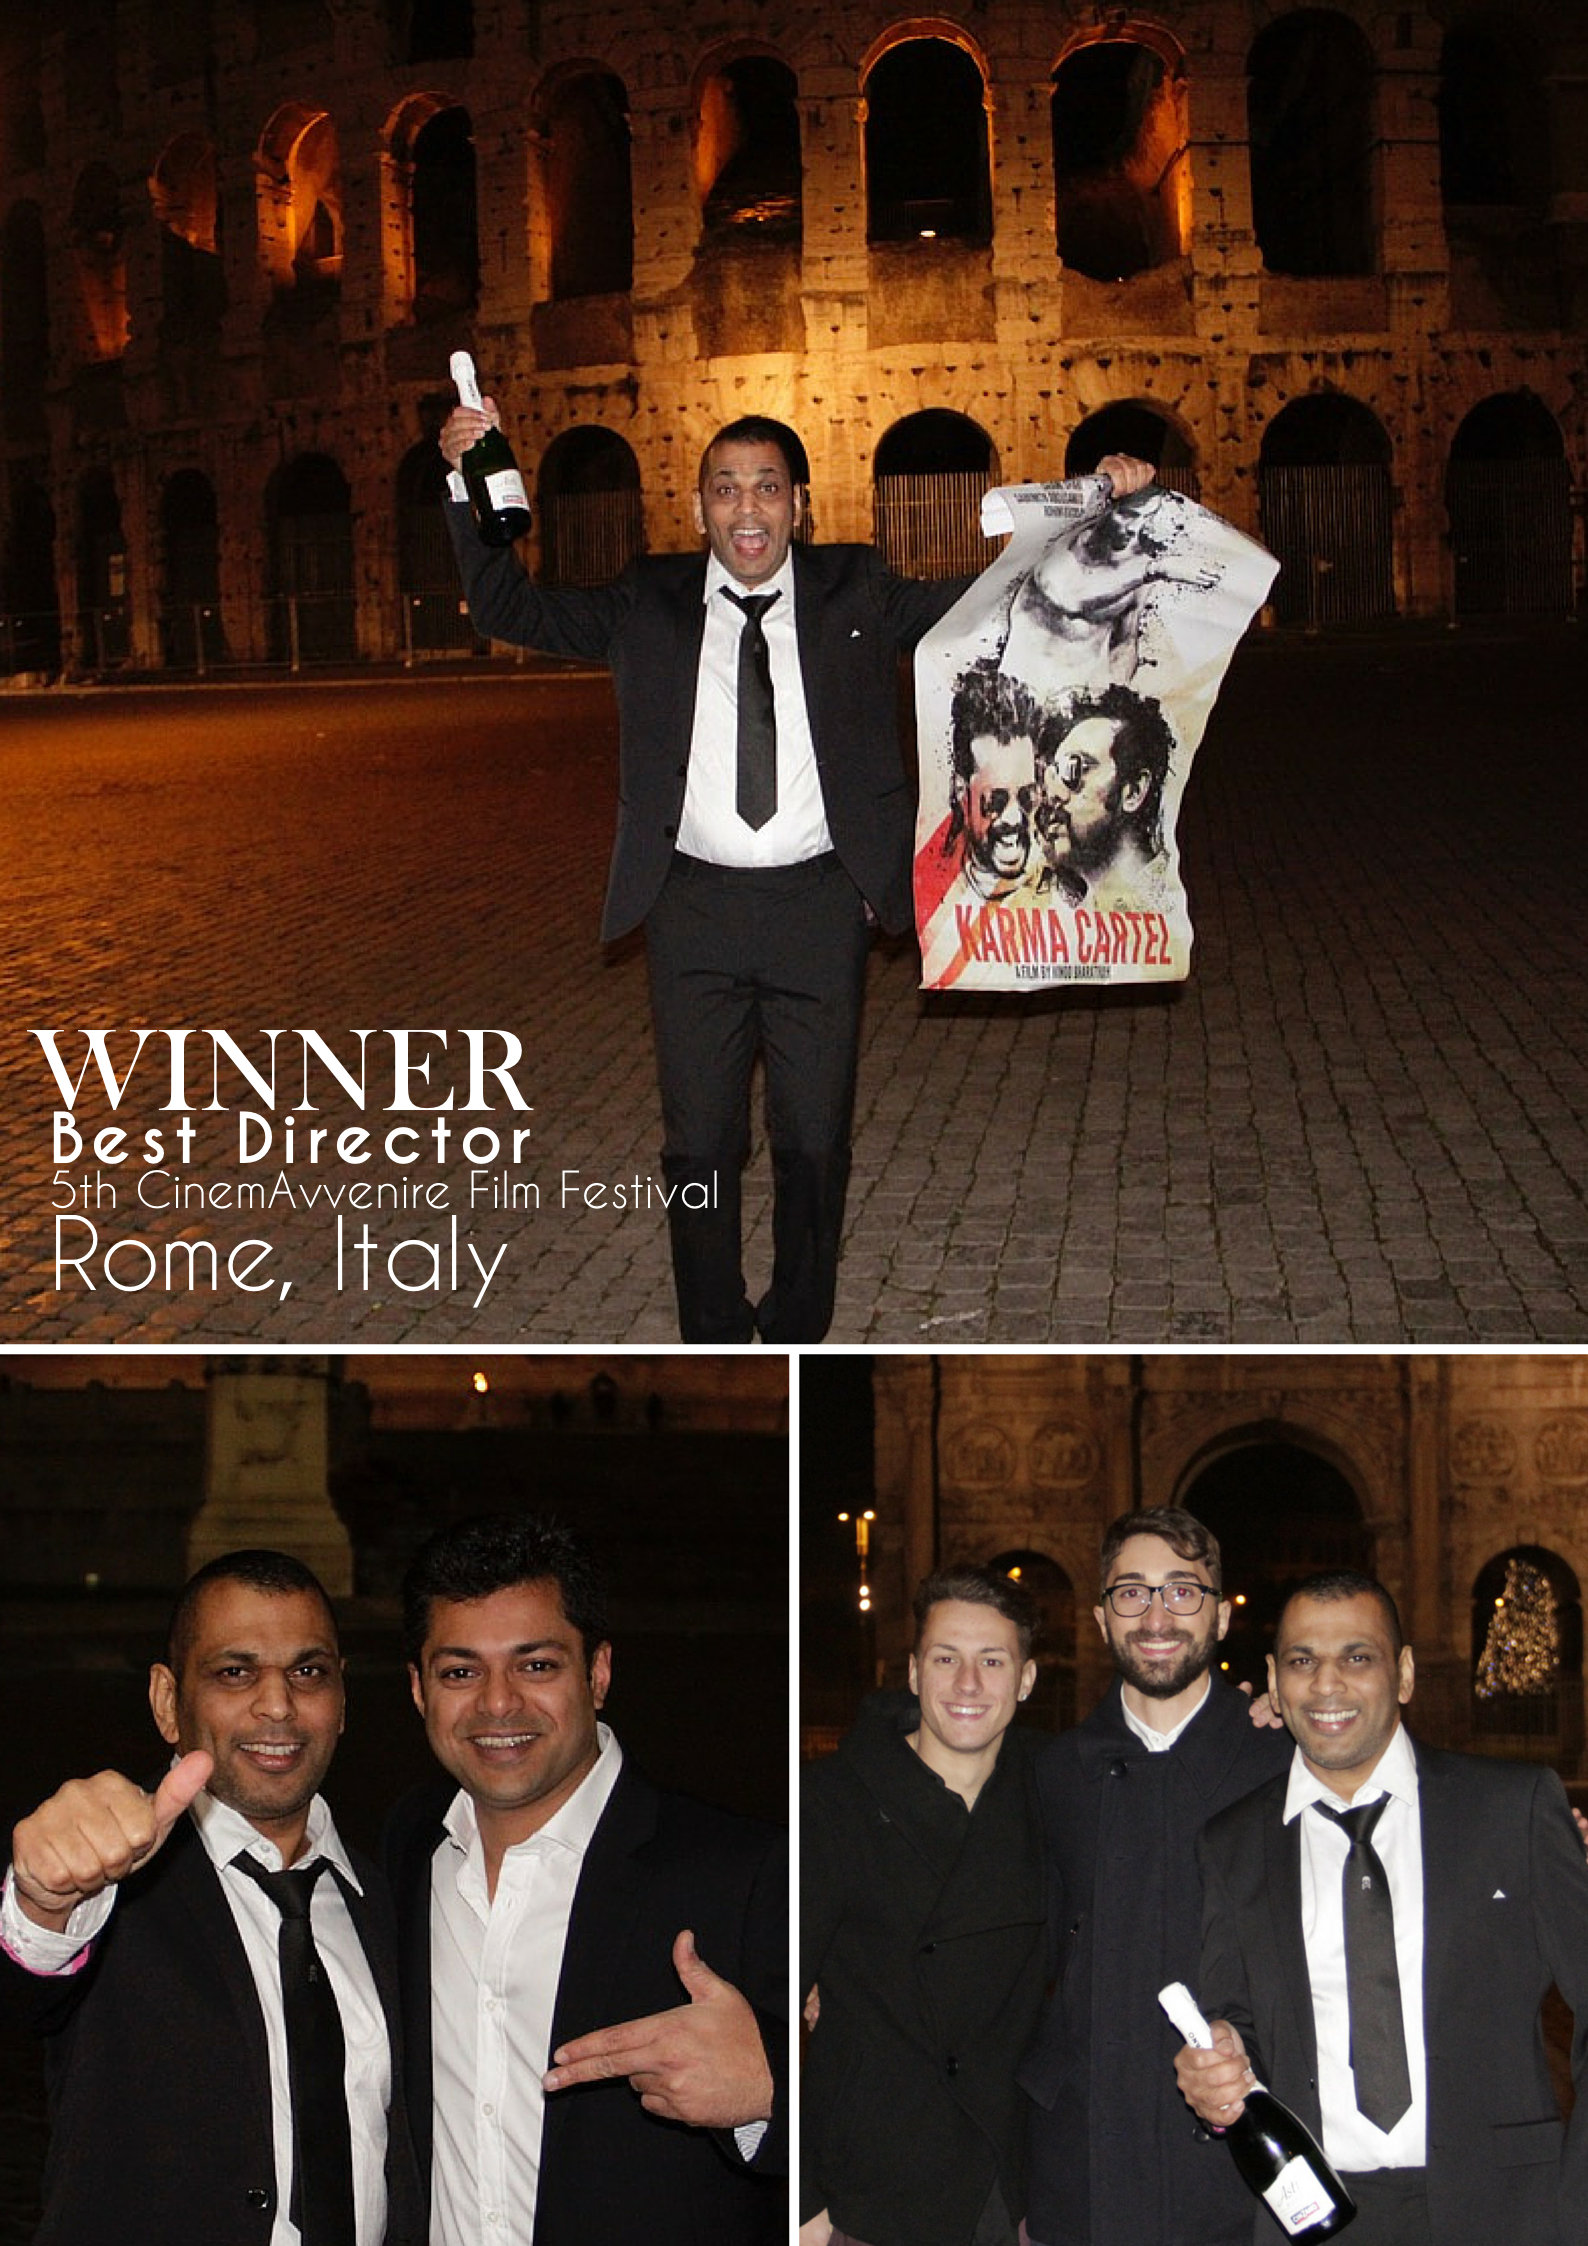 Celebration the Best Director win at the Colosseum, Rome.